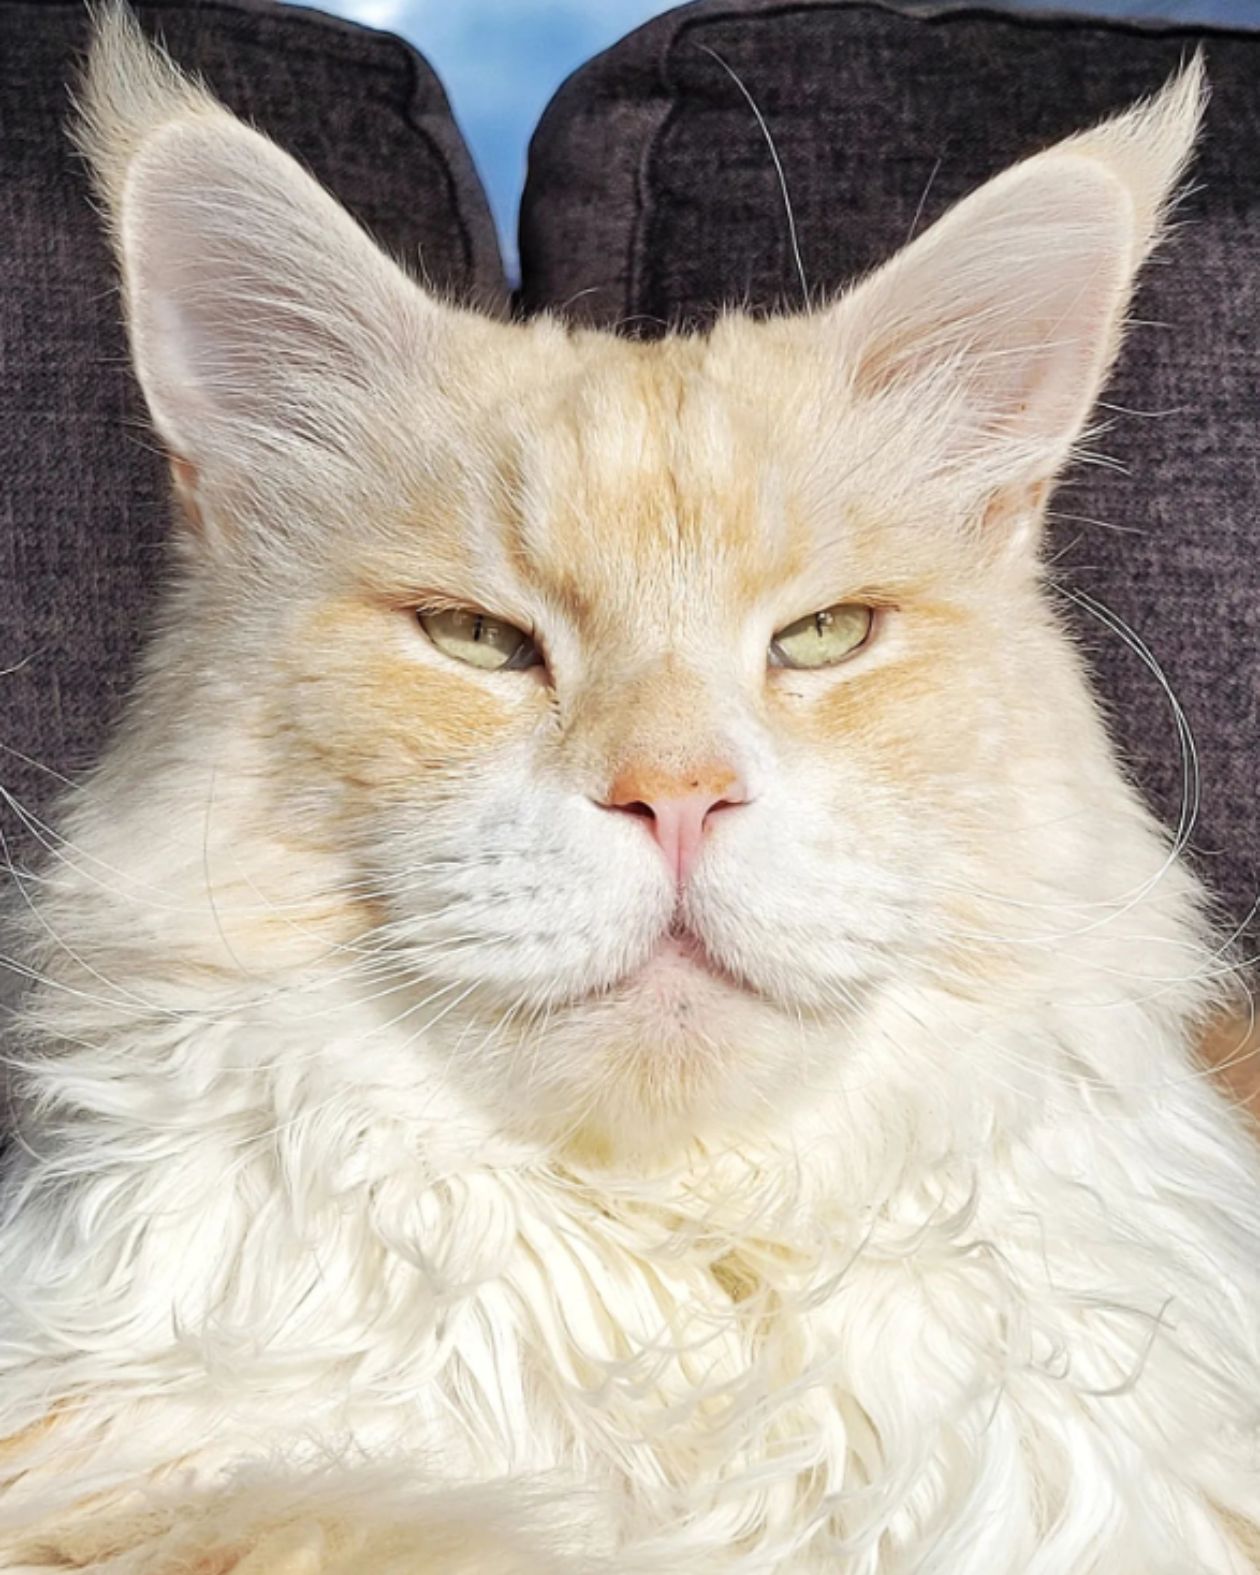 serious face of a maine coon cat